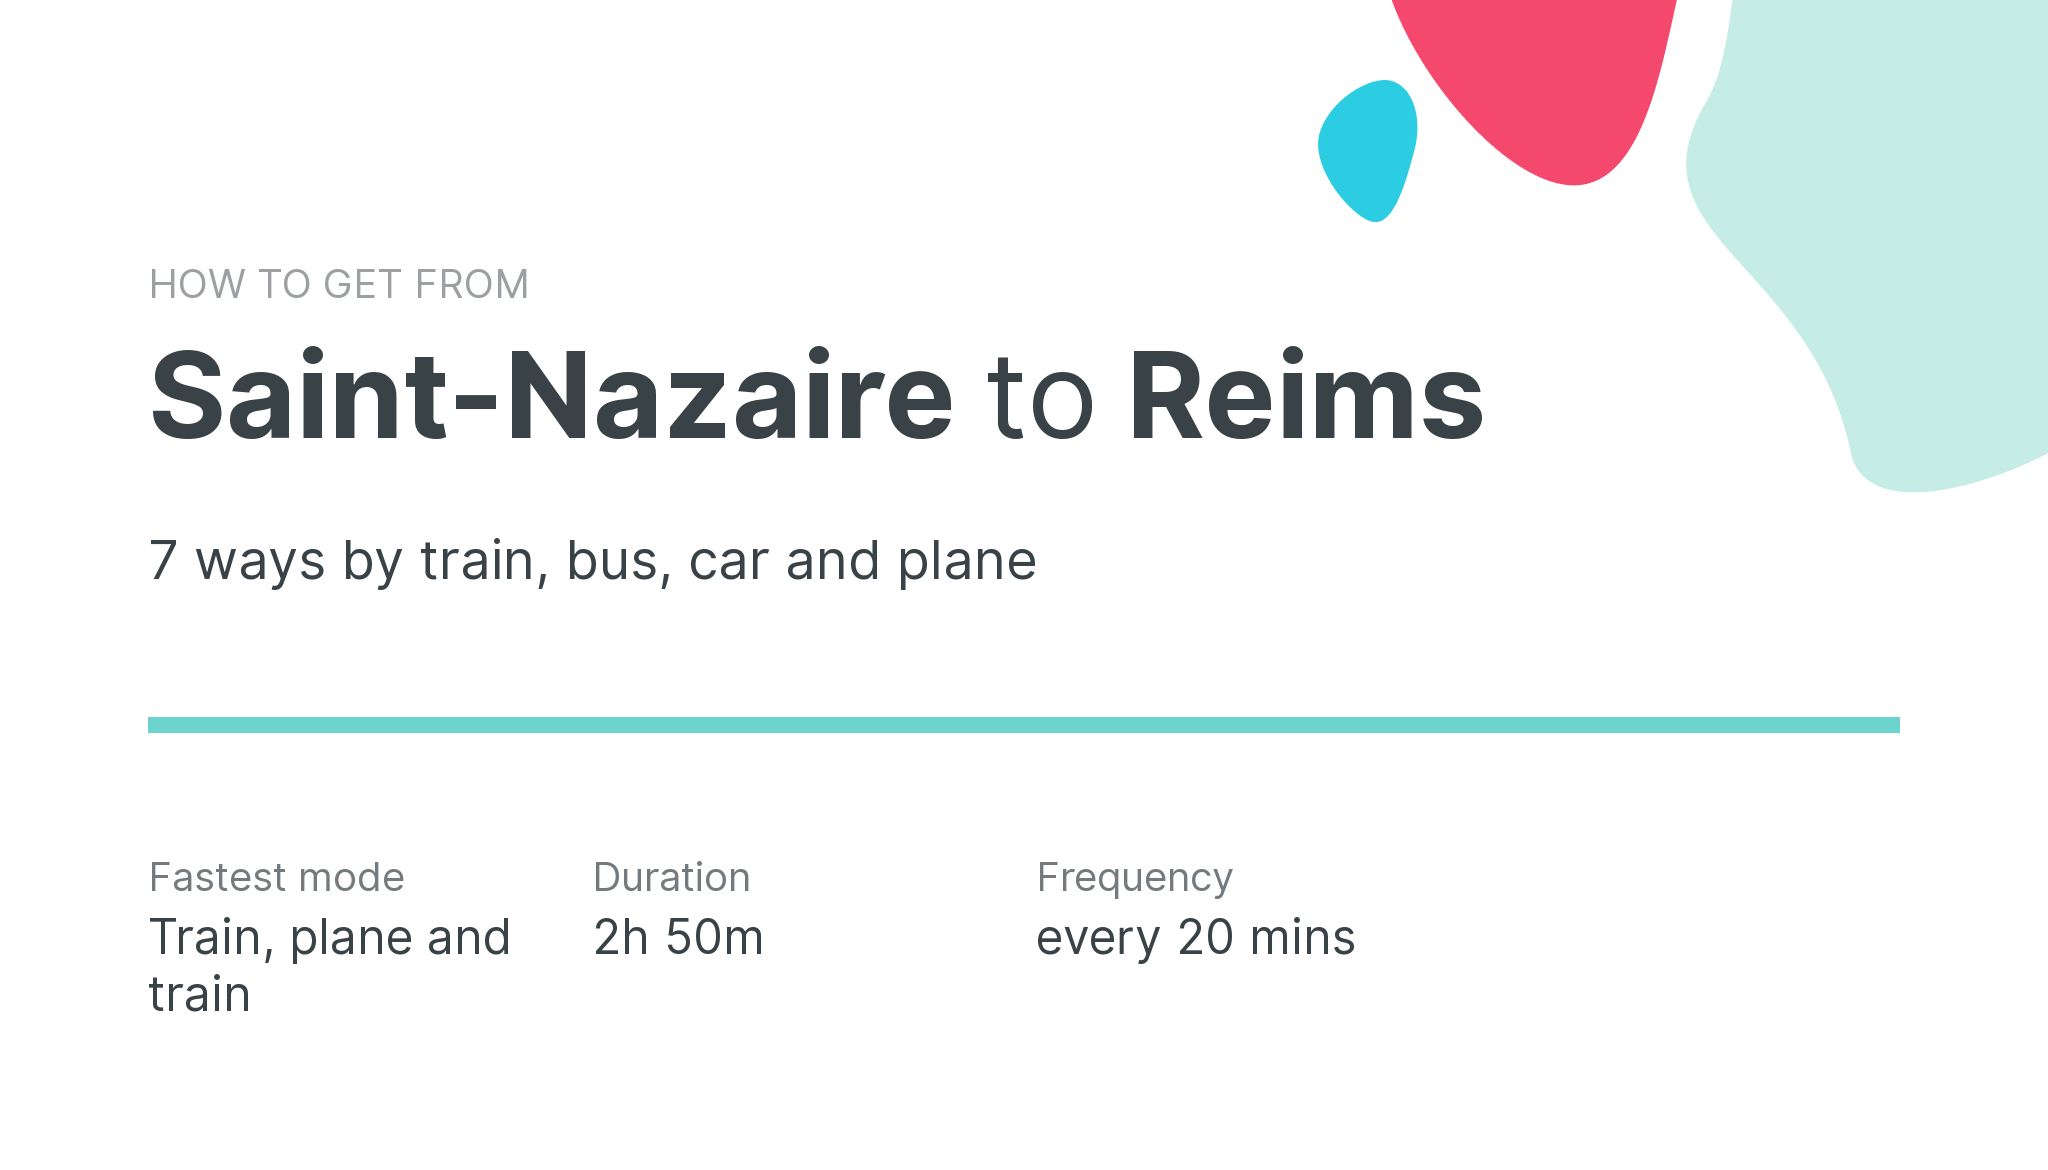 How do I get from Saint-Nazaire to Reims